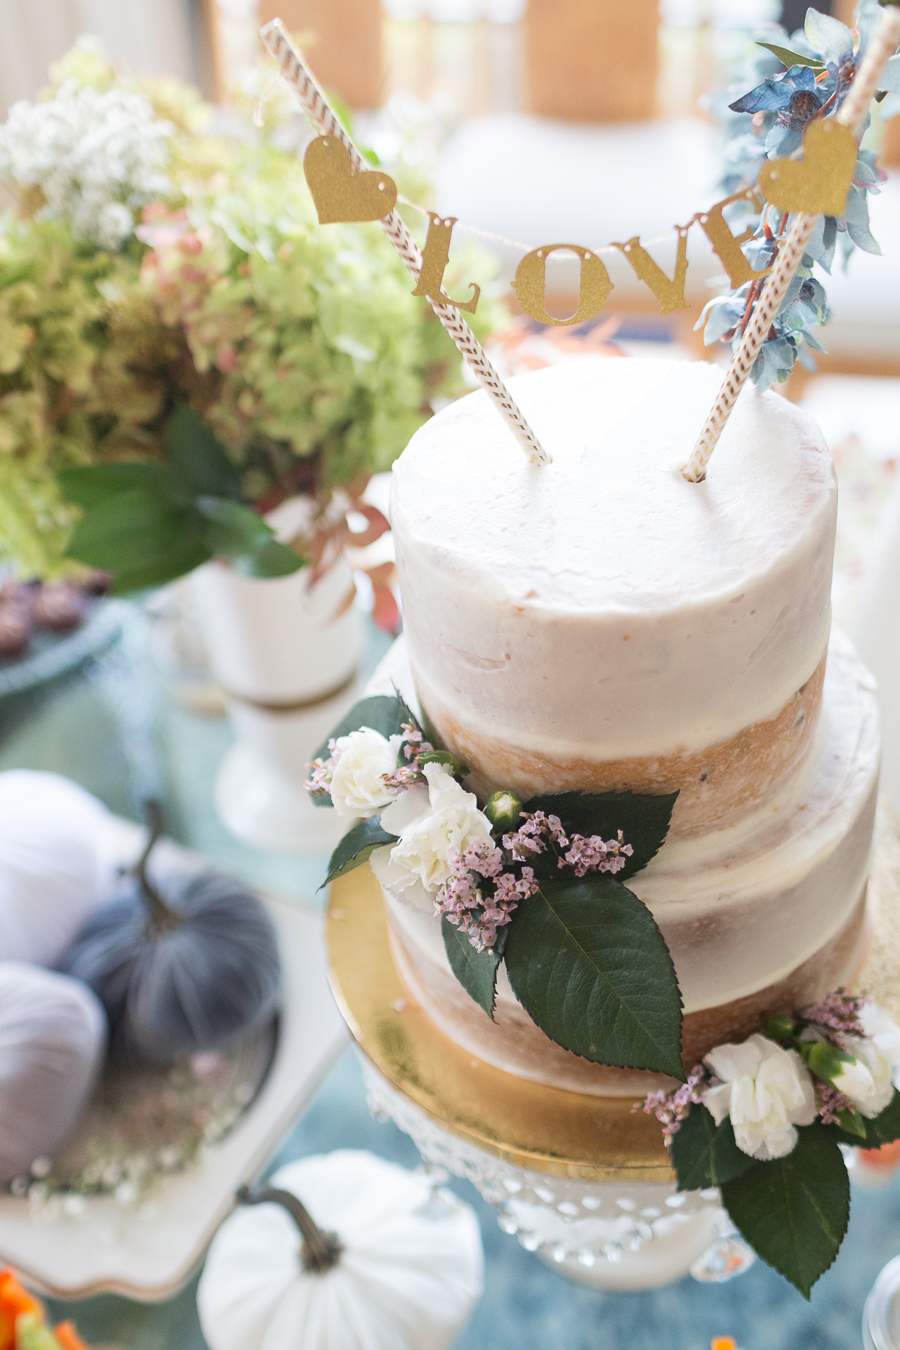 Beautiful Fall Bridal Shower Ideas fall bridal shower cake on a white cake stand surrounded by velvet pumpkins and hydrangeas